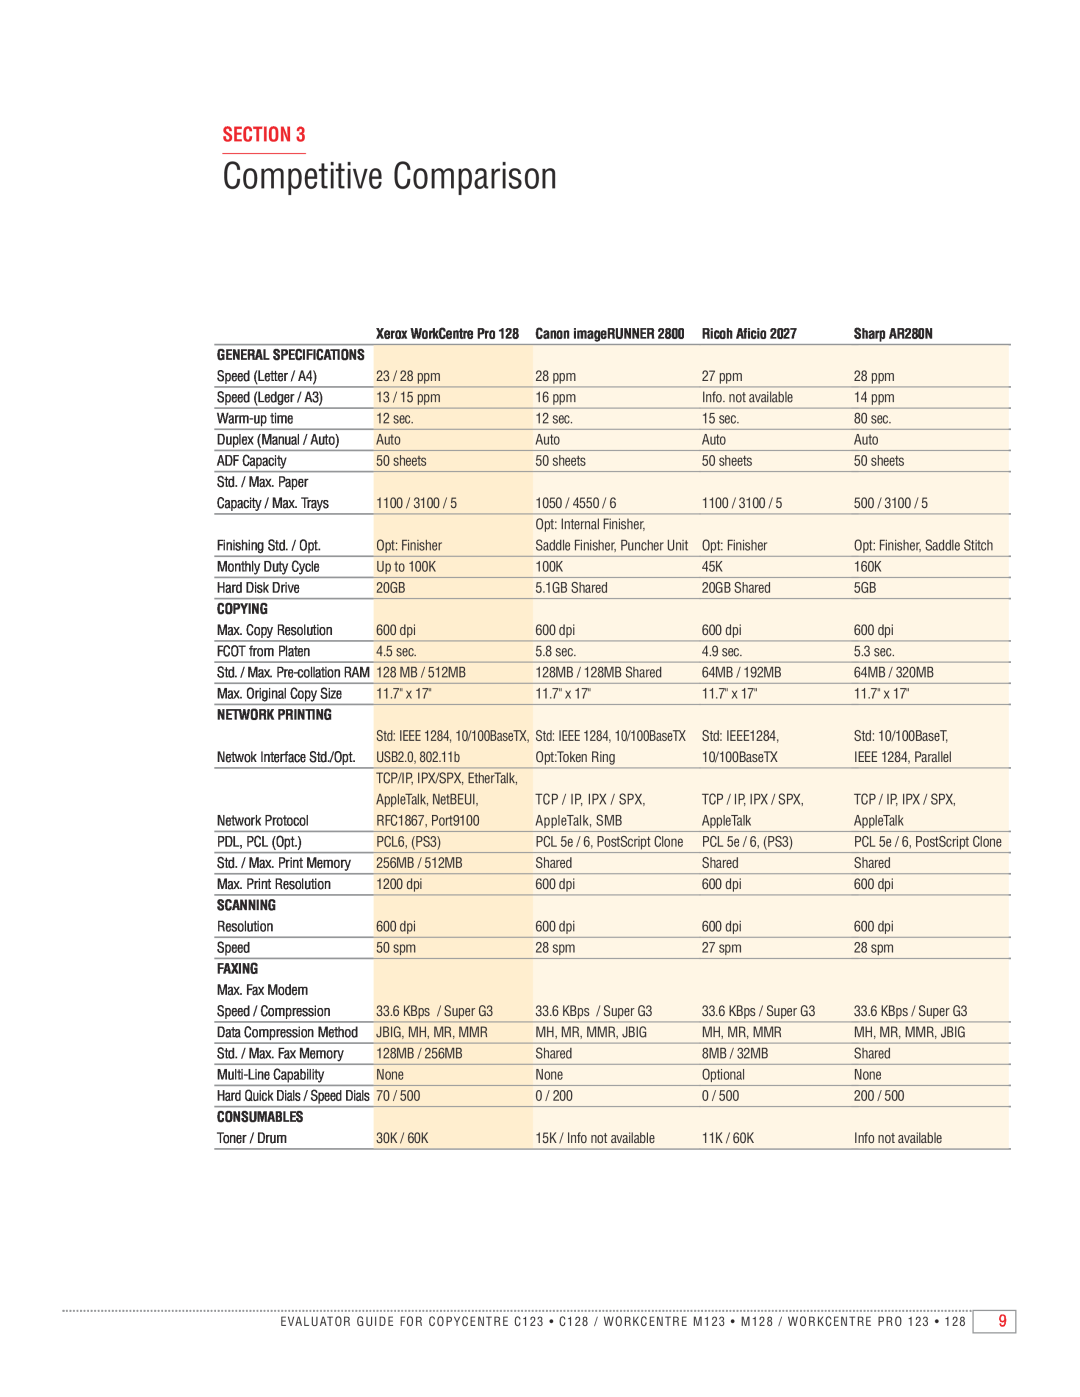 Xerox M123, 128 Competitive Comparison, Section, Ricoh Aficio, Sharp AR280N, Copying, Network Printing, Scanning, Faxing 